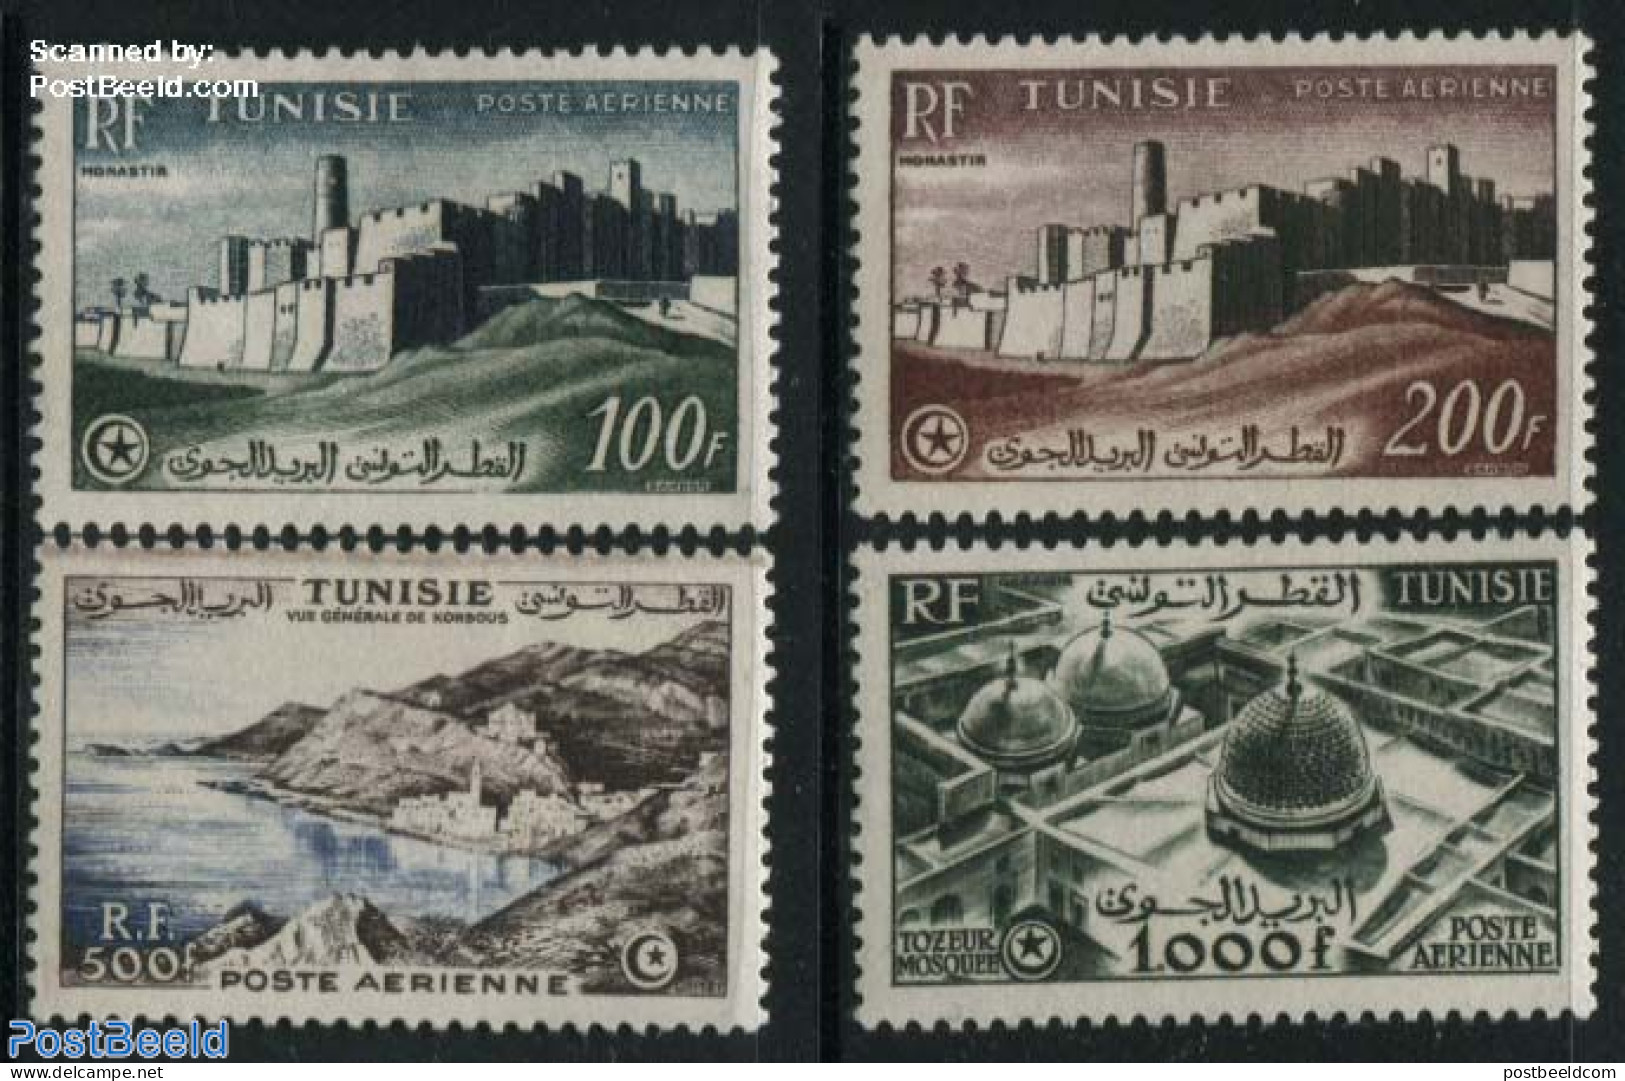 Tunisia 1953 Definitives 4v (with RF), Unused (hinged), Art - Castles & Fortifications - Castles